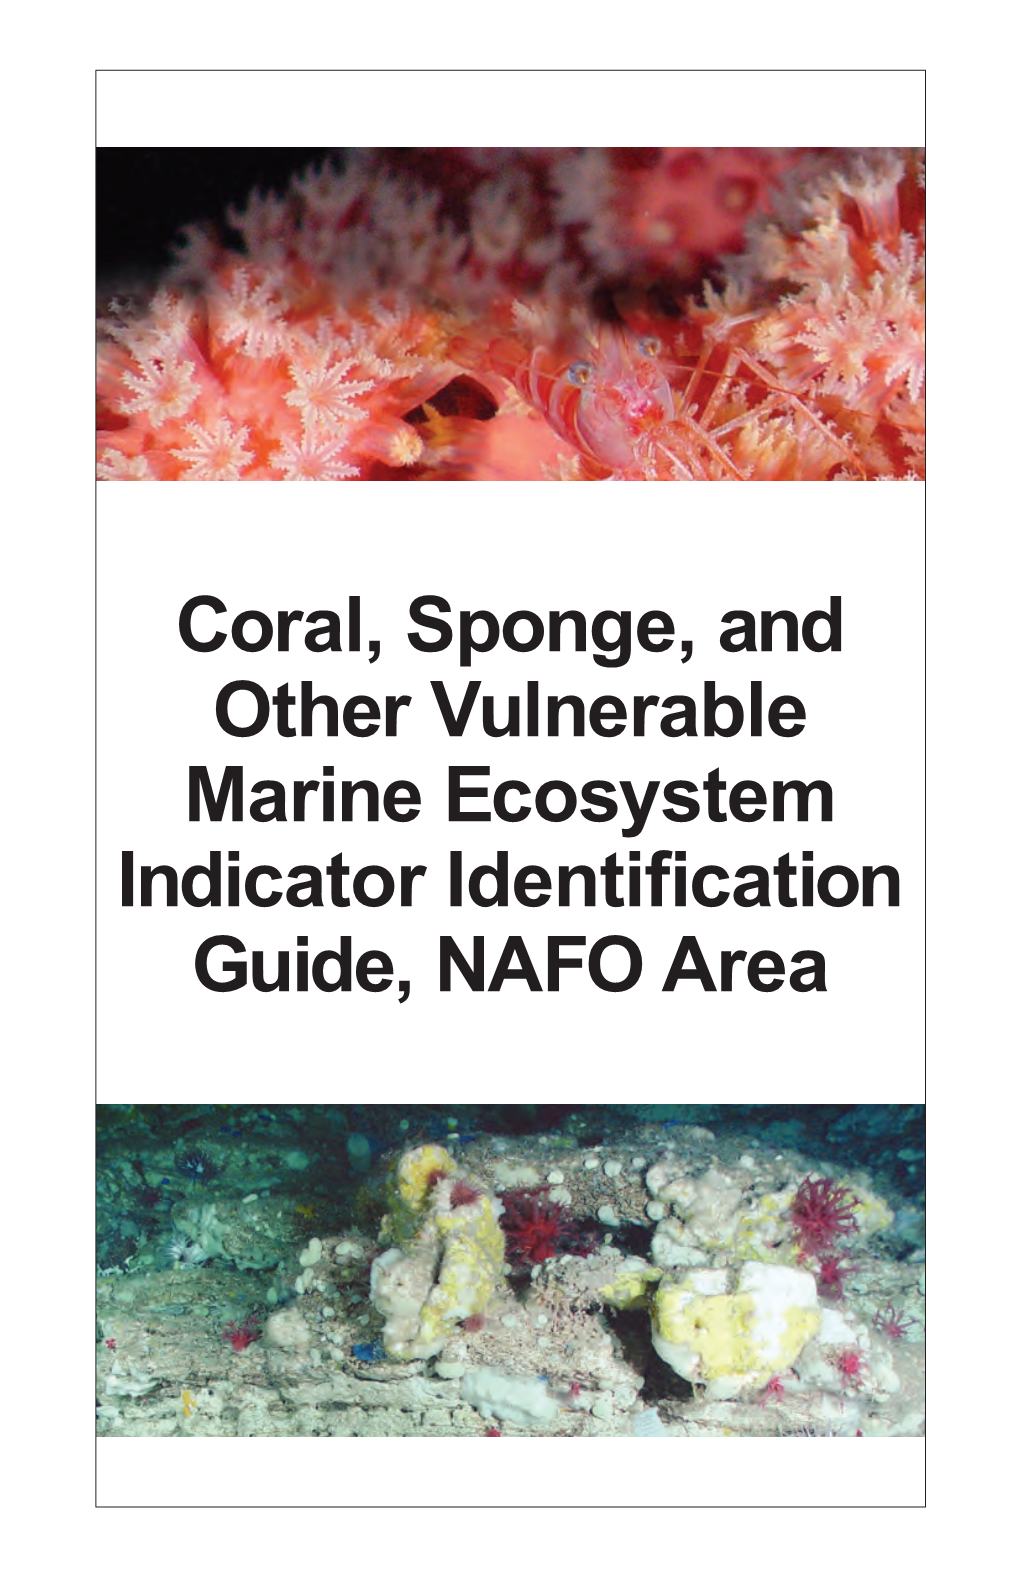 Coral, Sponge, and Other Vulnerable Marine Ecosystem Indicator Identification Guide, NAFO Area